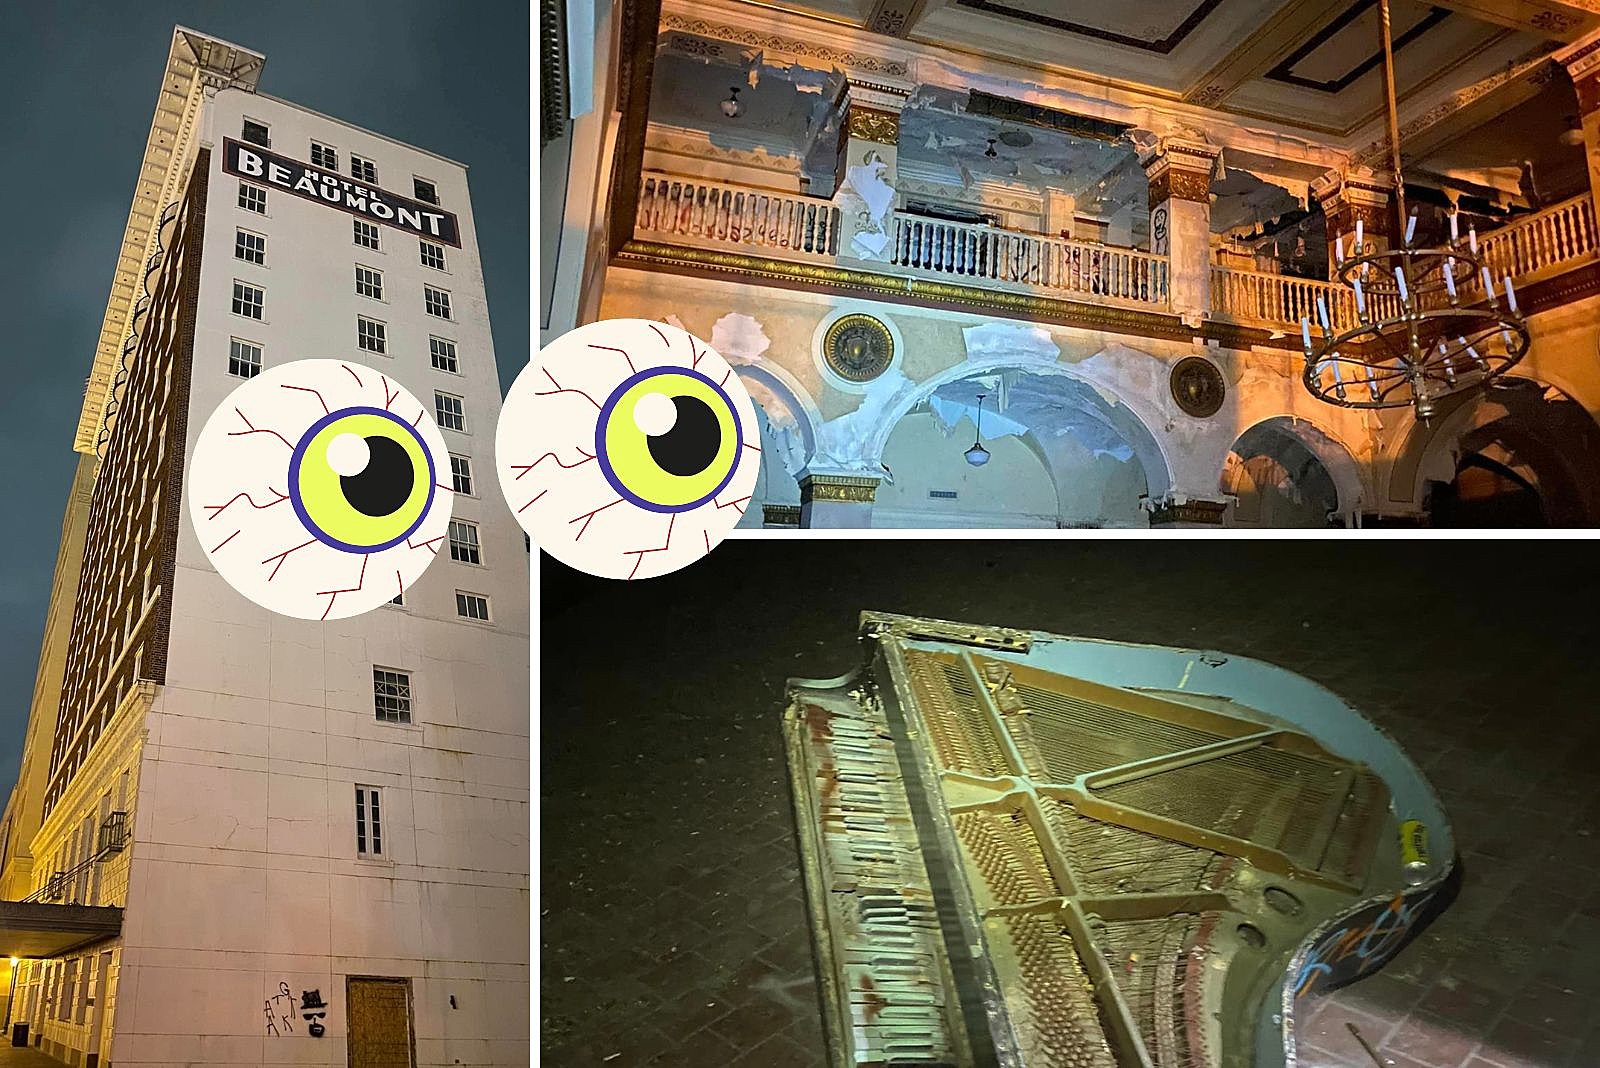 See Inside This Scary Abandoned Hotel In Beaumont, Texas photo